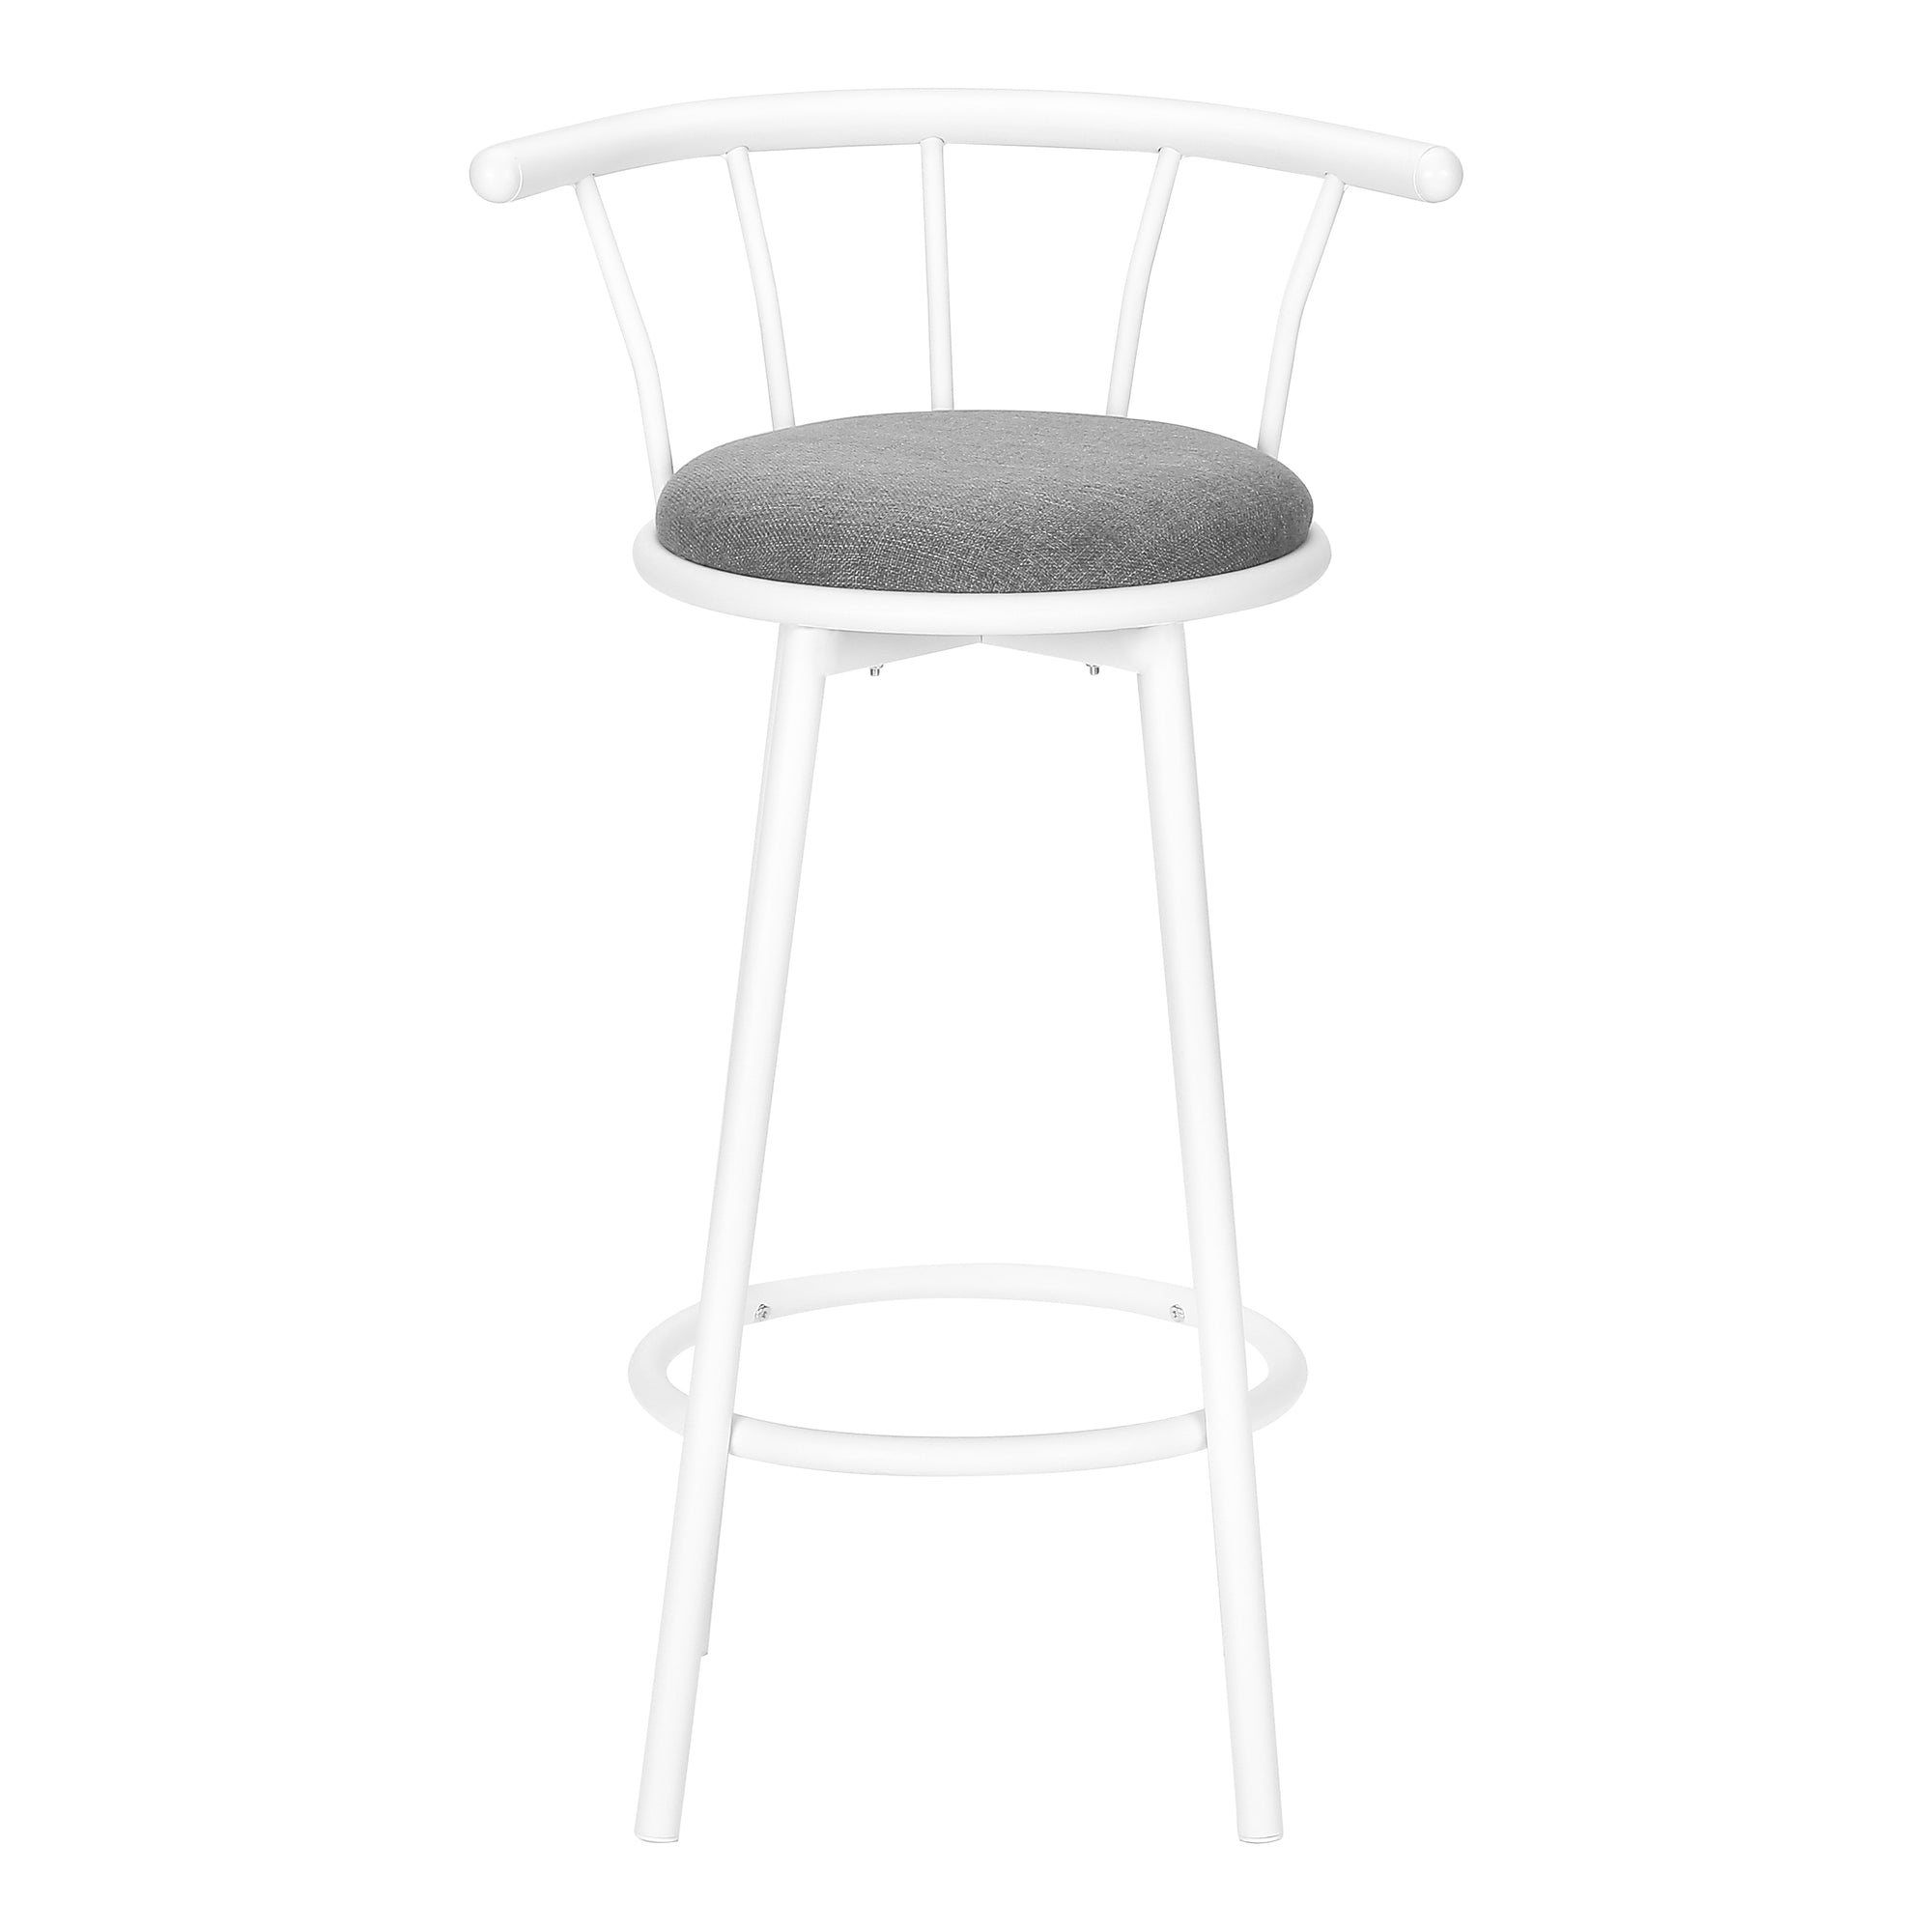 MN-502397    Bar Stool, Set Of 2, Swivel, Bar Height, White Metal, Grey Leather Look, Contemporary, Modern